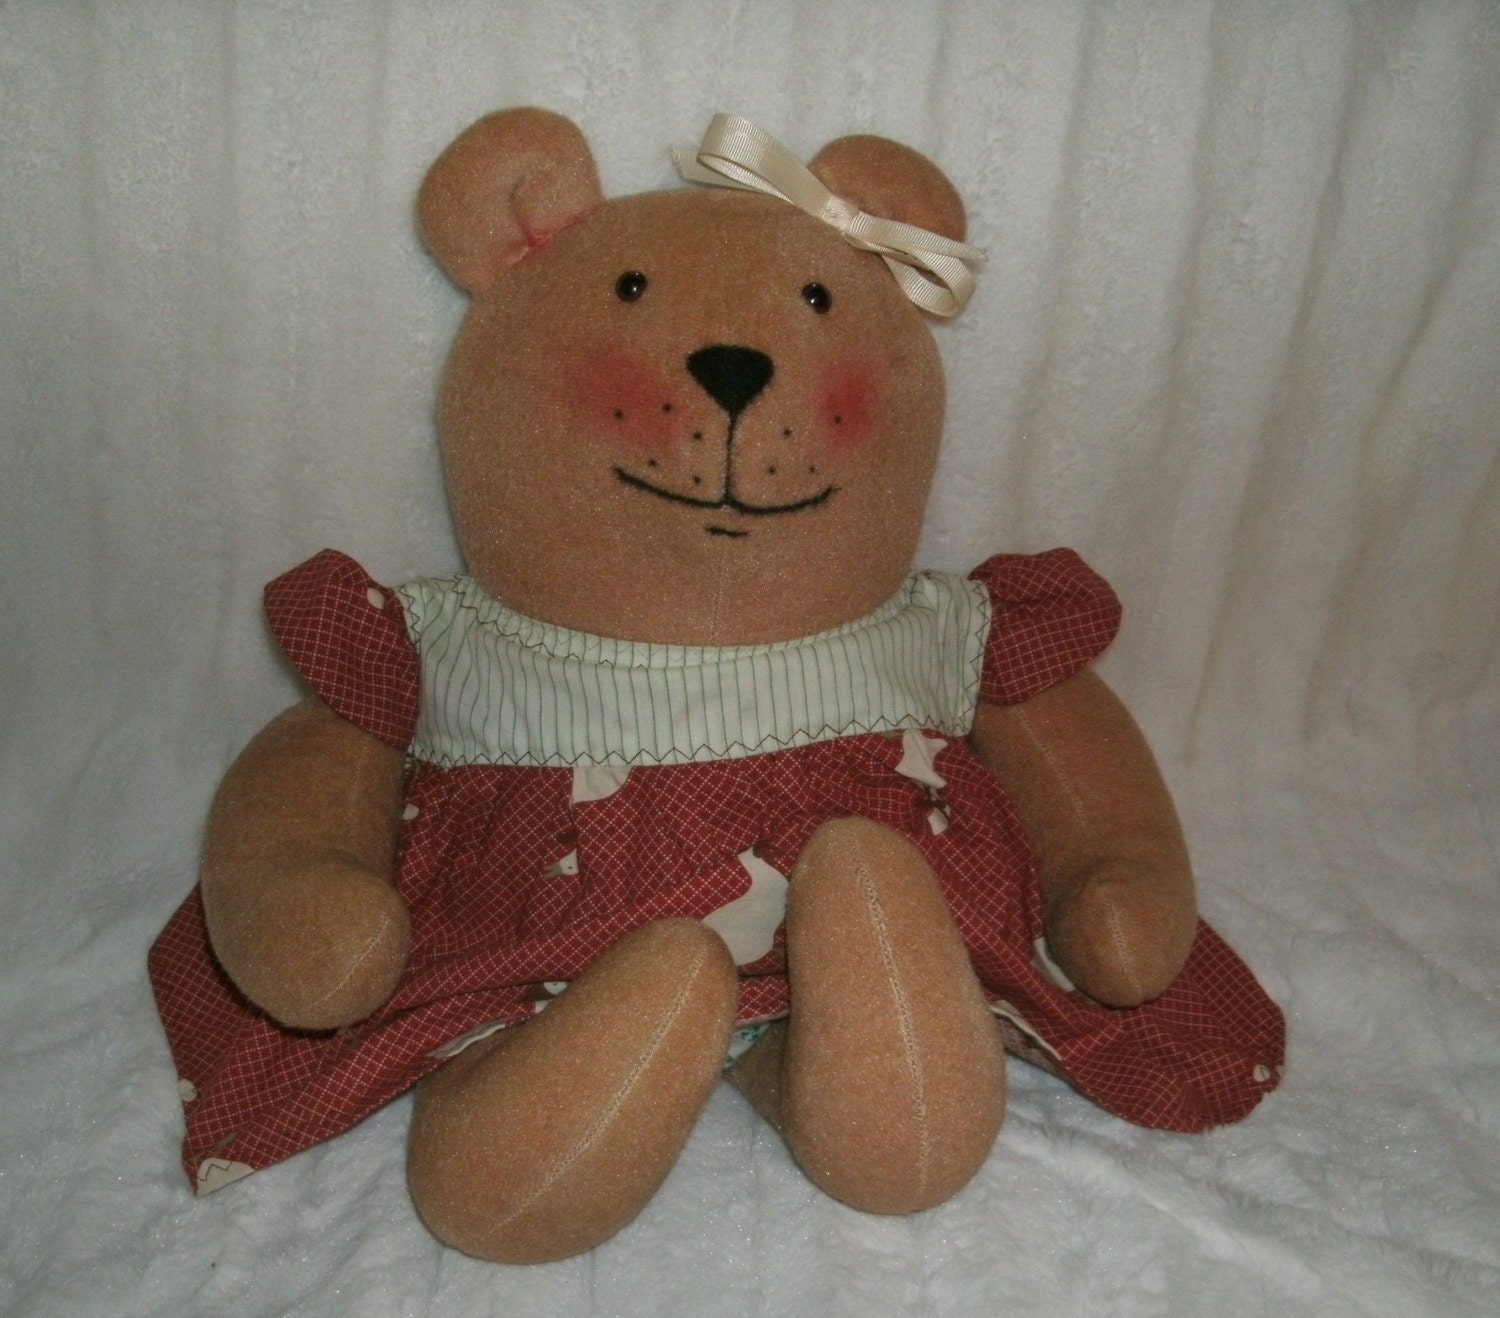 Popular items for country bears on Etsy